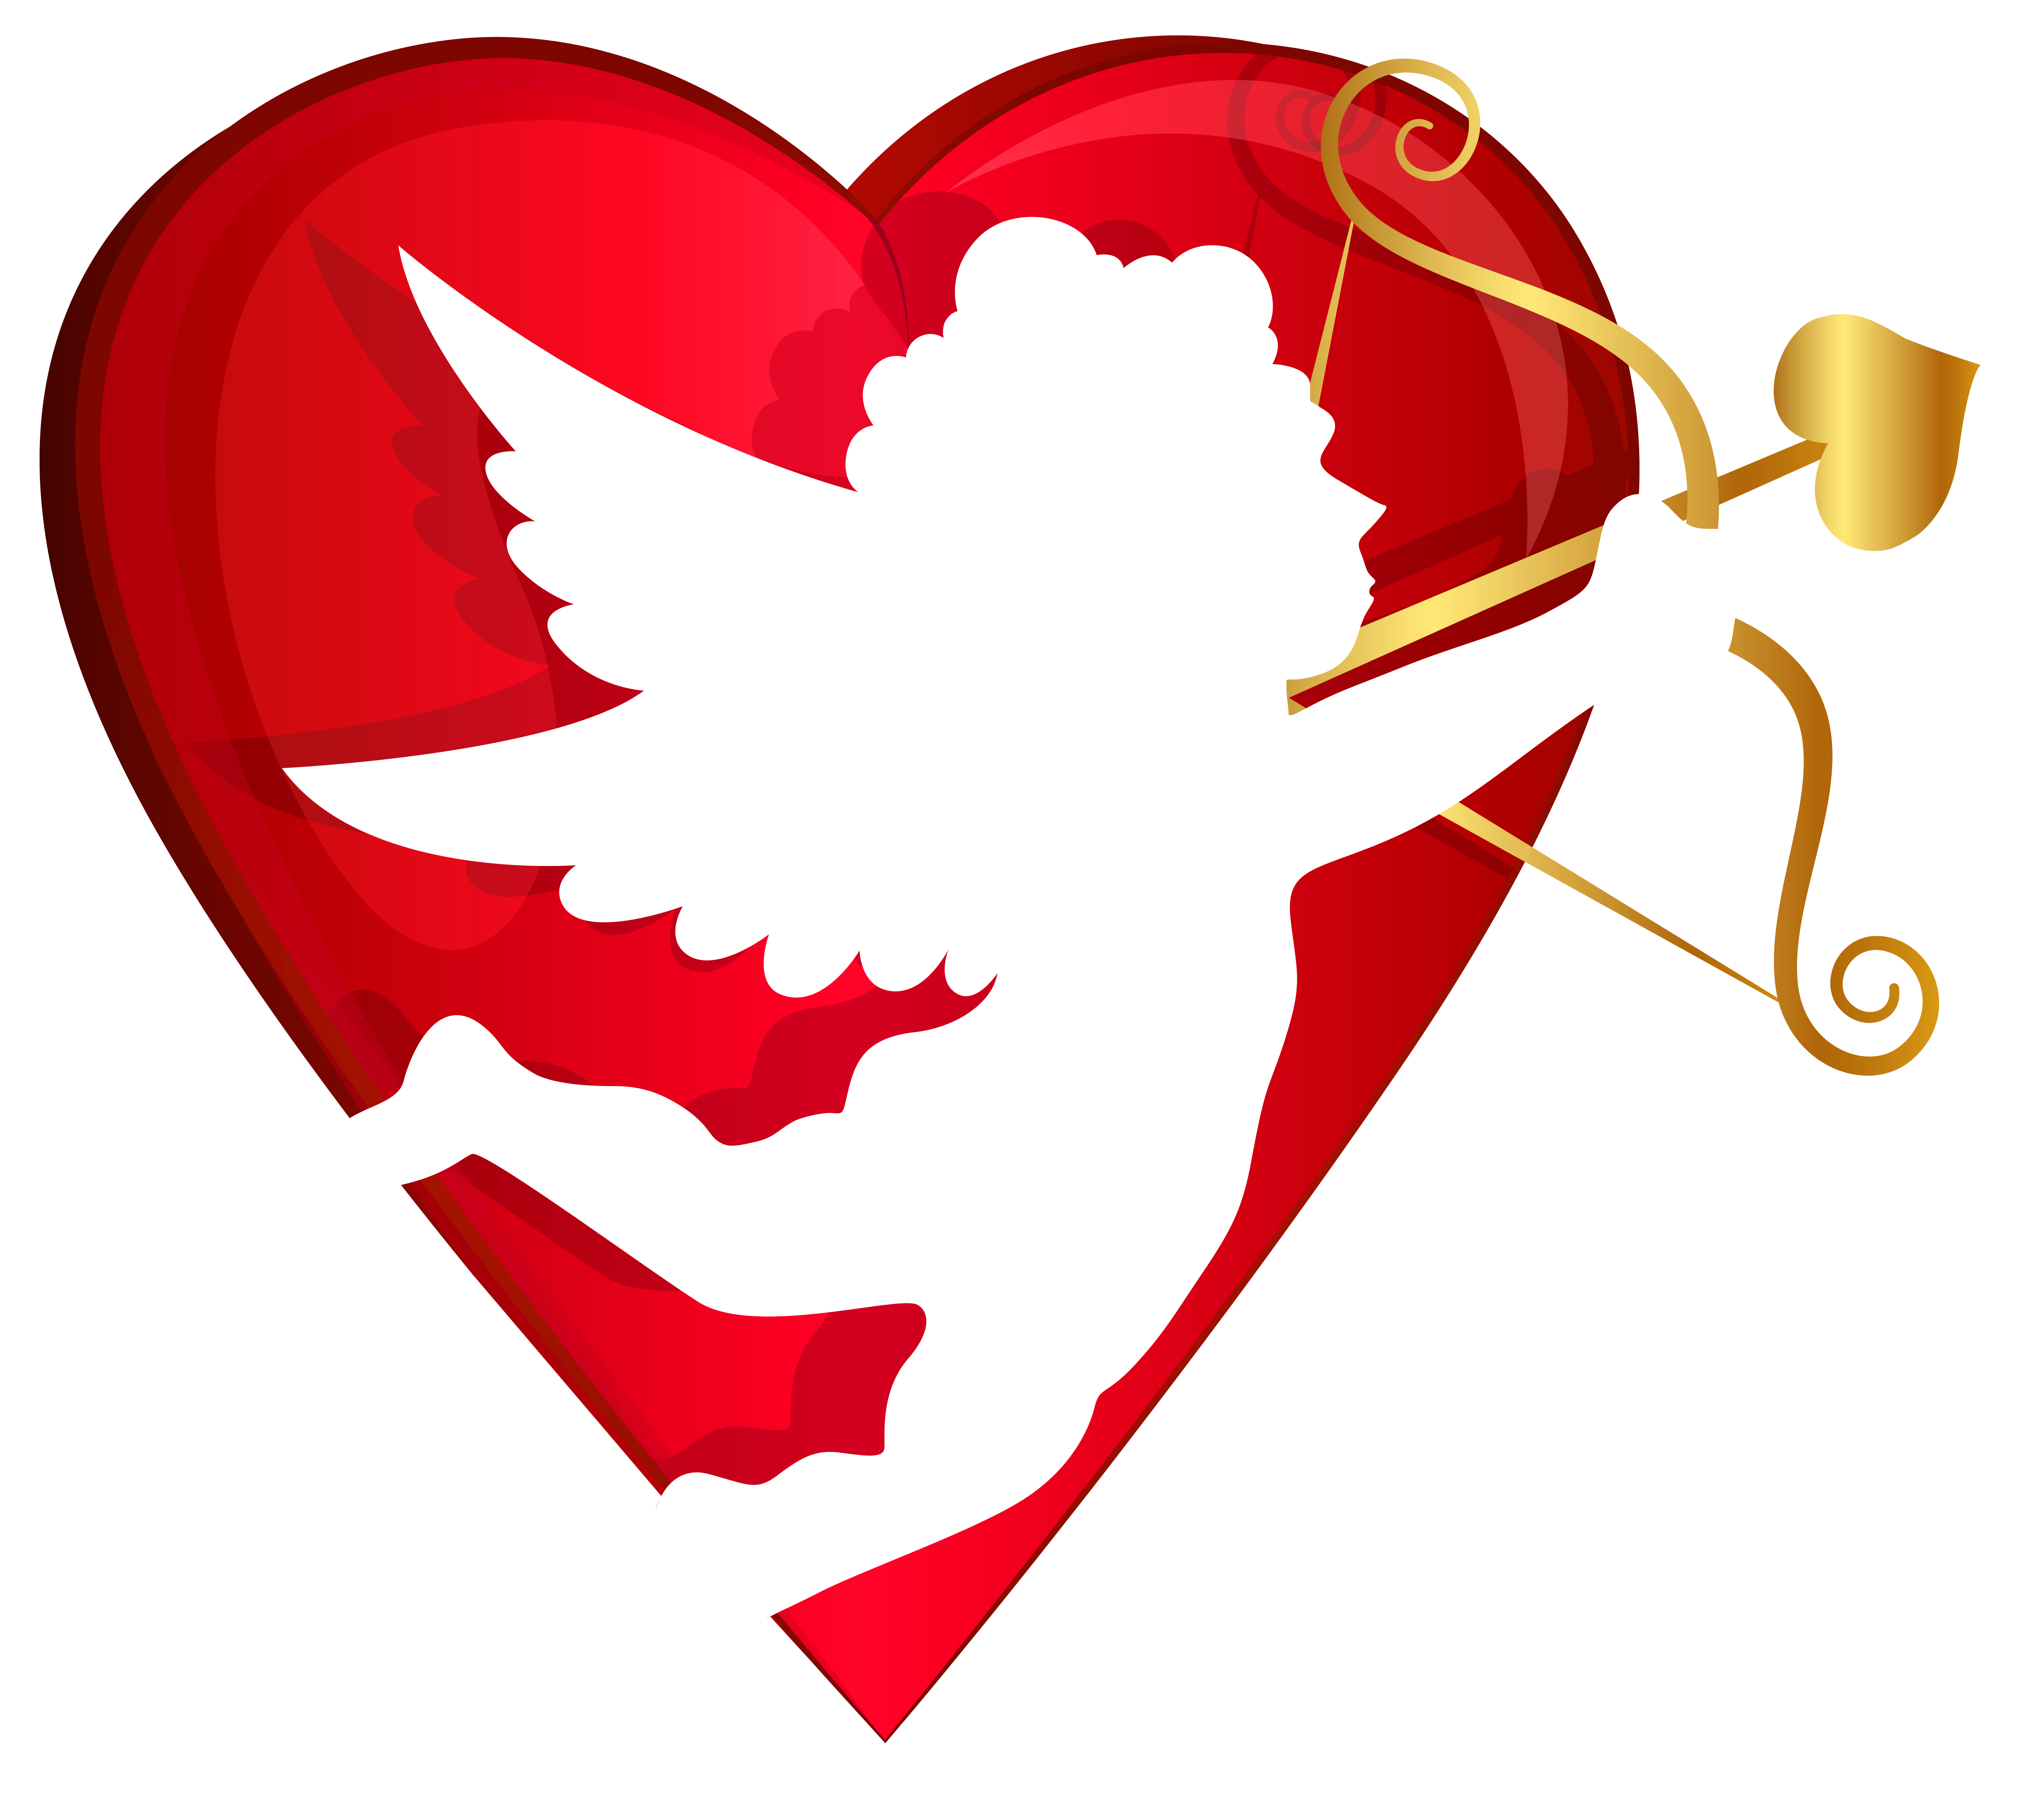 red heart clipart with no background